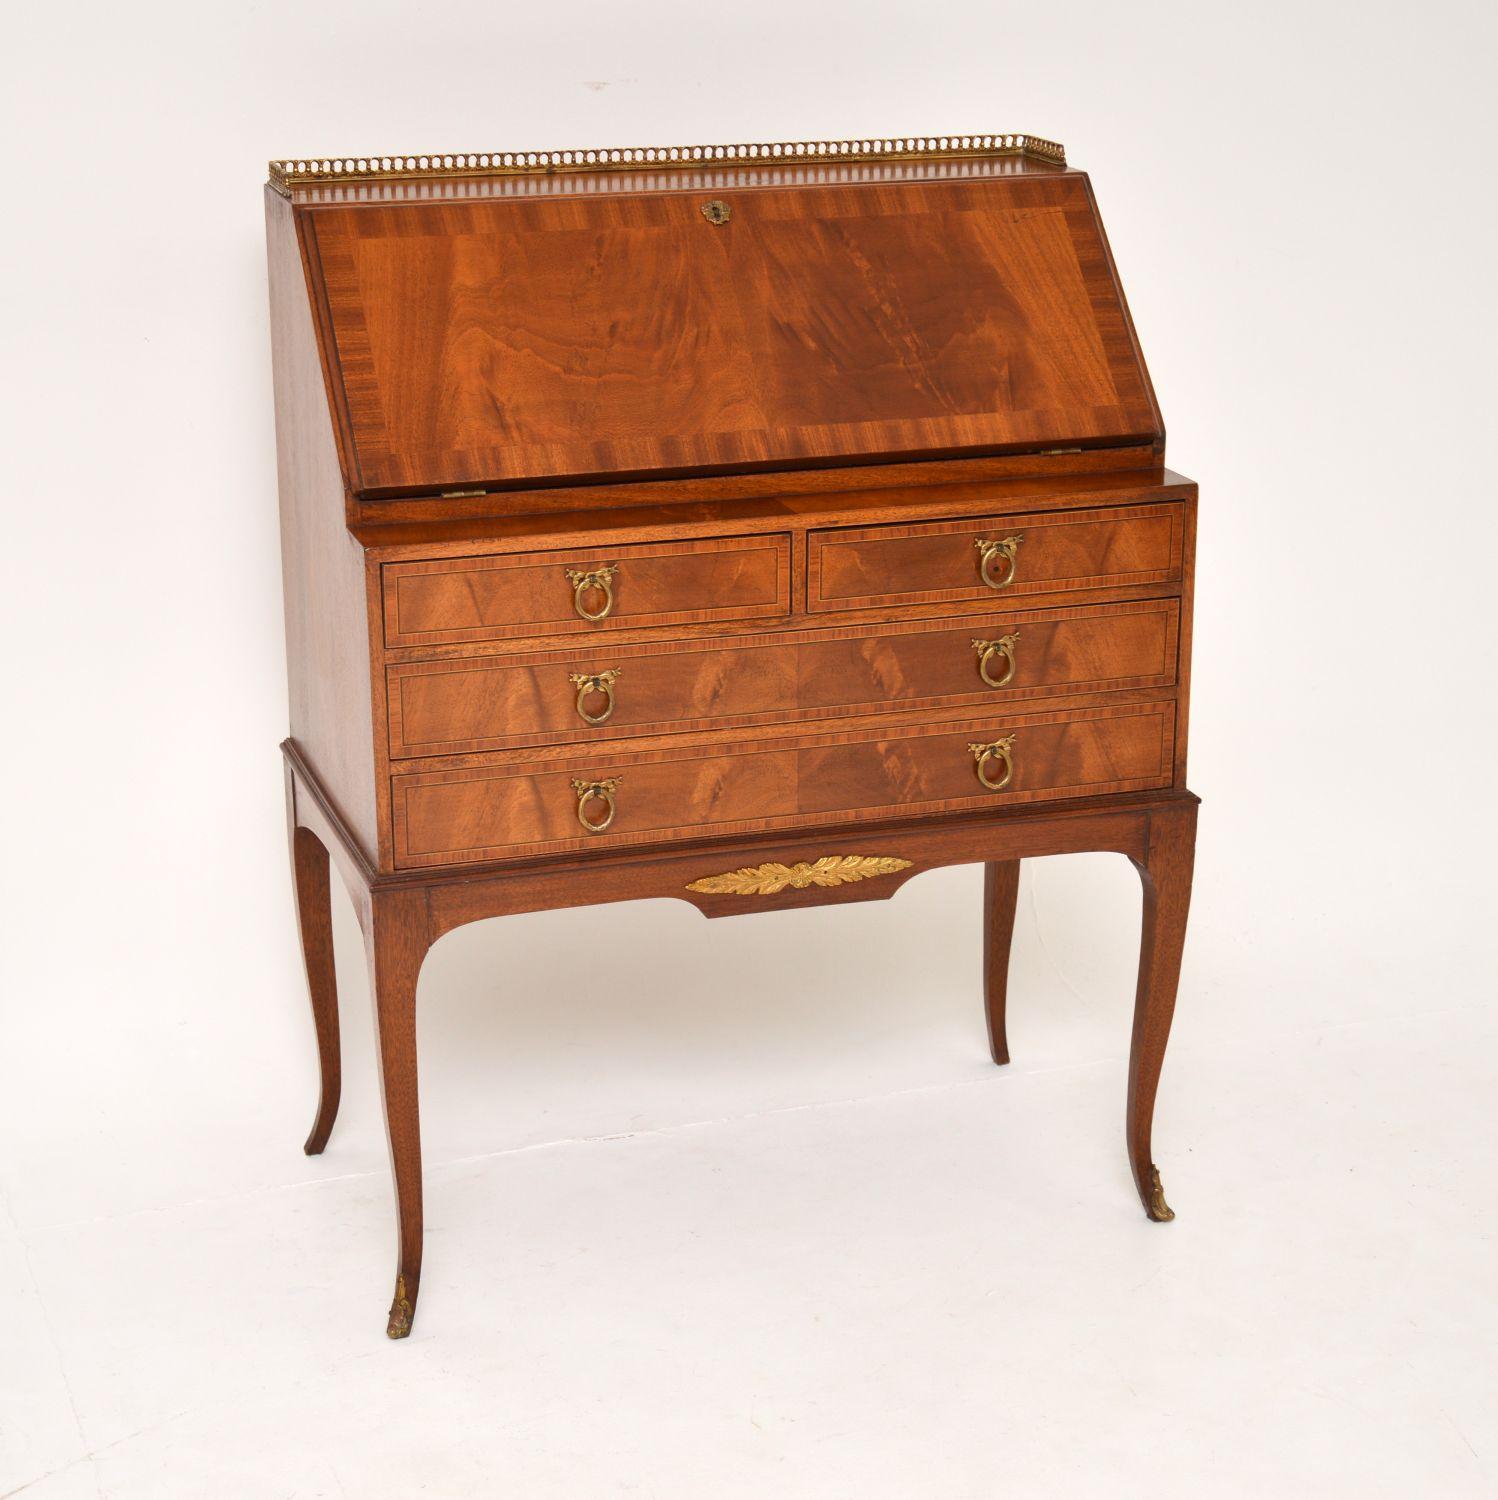 An elegant neo-classical style antique writing bureau in wood with gilt bronze mounts, dating from around the 1920’s period.

The quality is outstanding, with gorgeous flame wood grain patterns and an inset leather writing surface. The brass